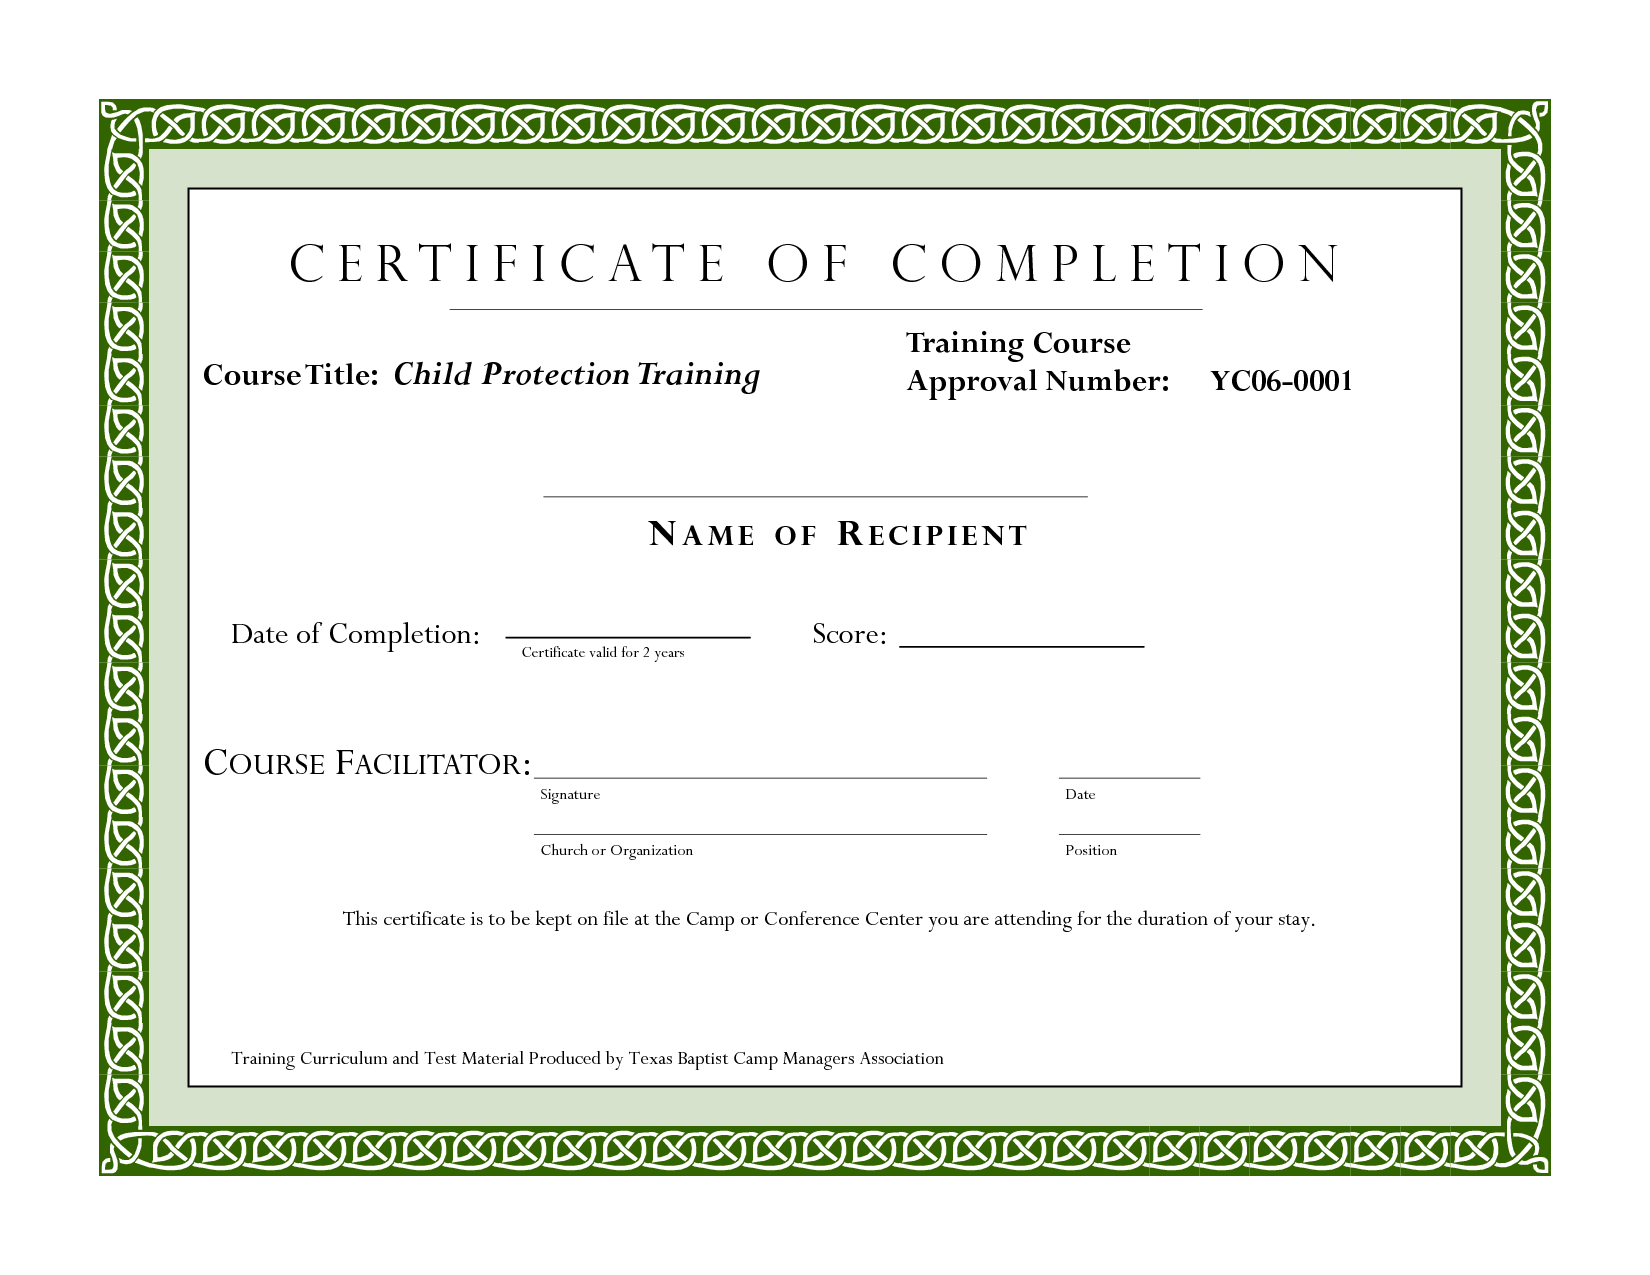 Course Completion Certificate Template | Certificate Of In Certificate Template For Project Completion